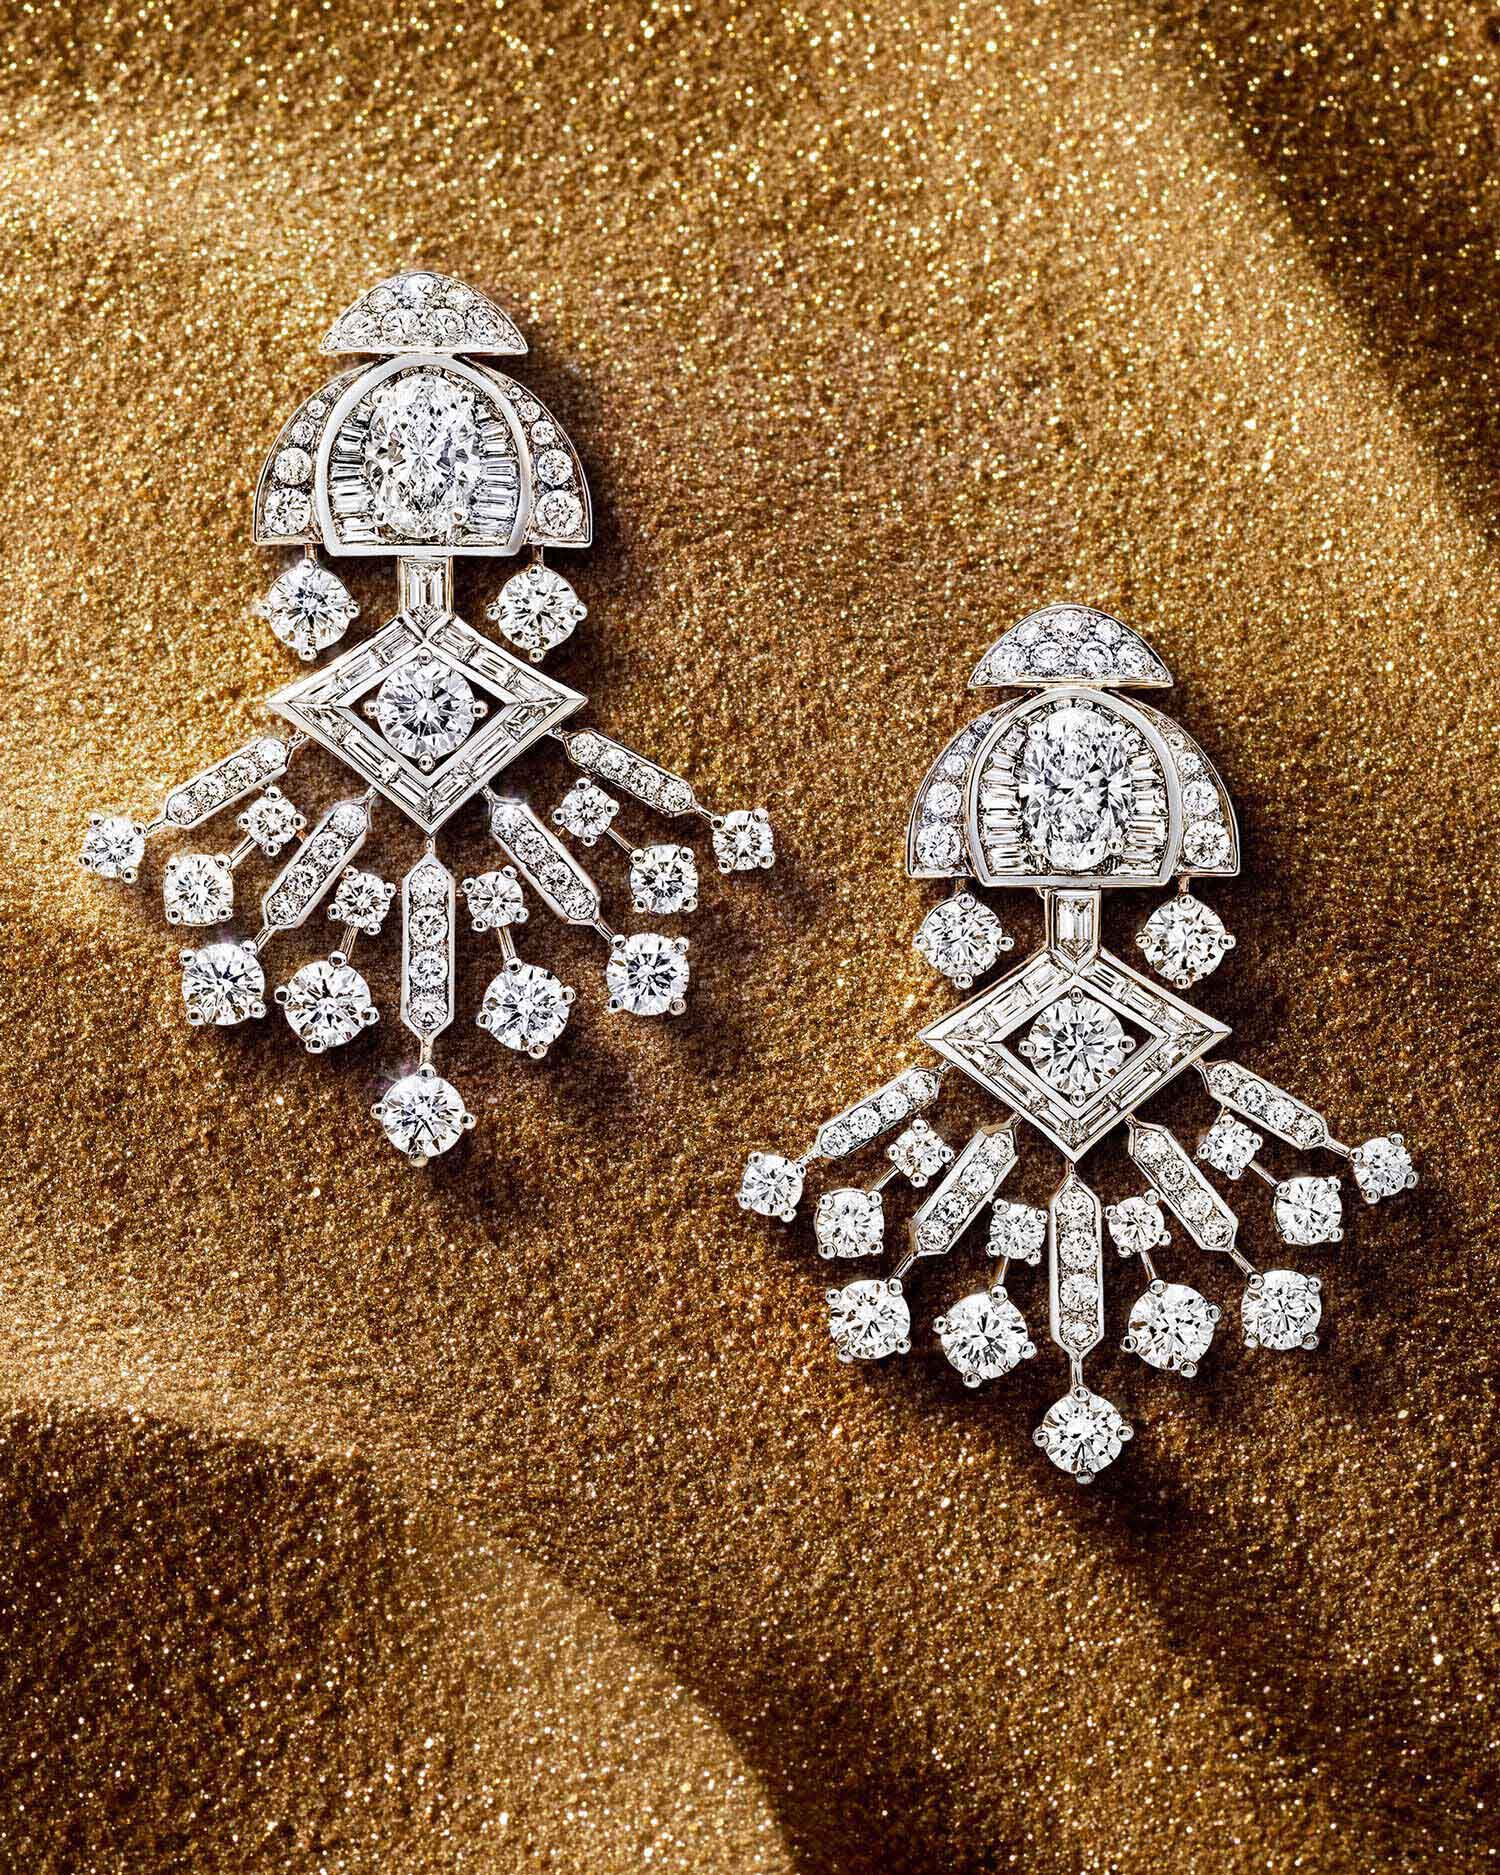 Diamond Night Moon high jewellery earrings from the Graff Tribal collection